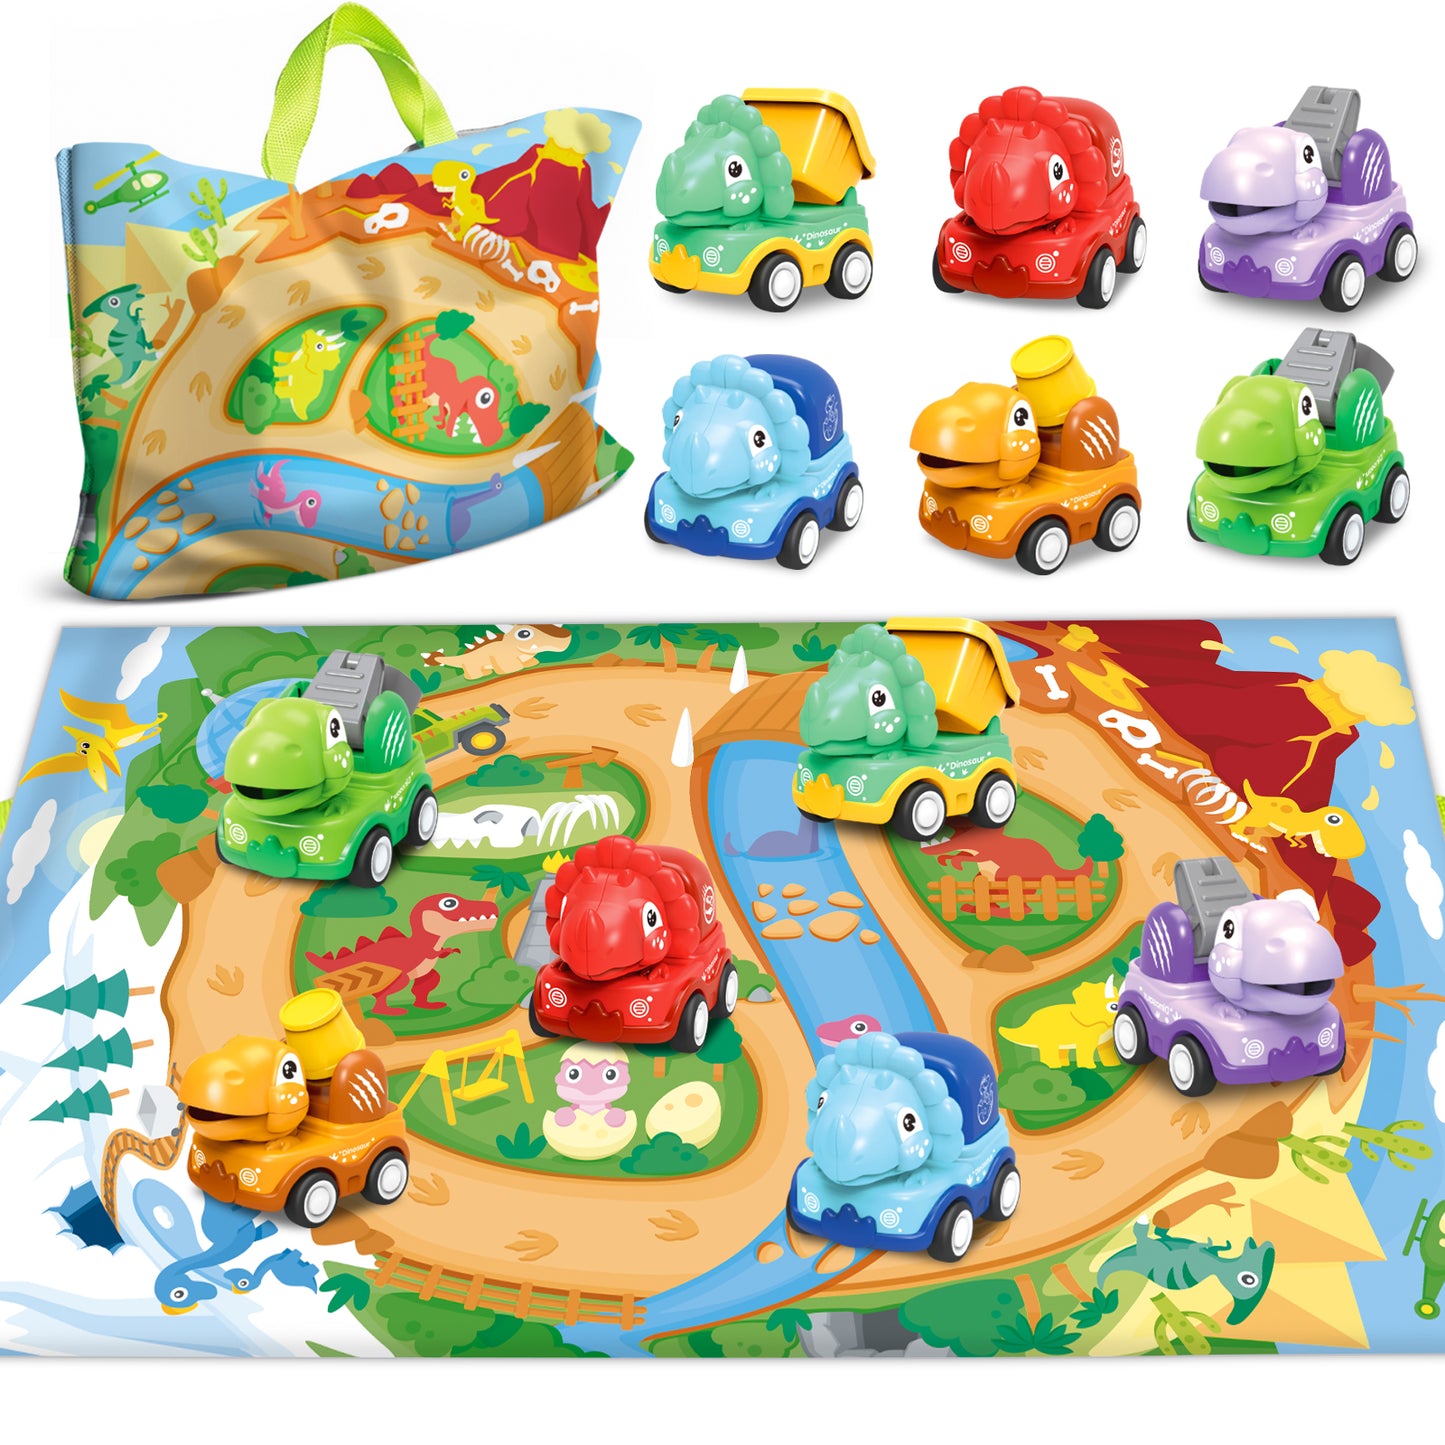 Baby Truck Car Toys with Playmat/Storage Bag, Baby Toys 12-18 Months|Toys for 1 2 3 Year Girl Boy| Baby Construction Vehicles 1st Birthday Gift Educational Toys for Infants Toddlers